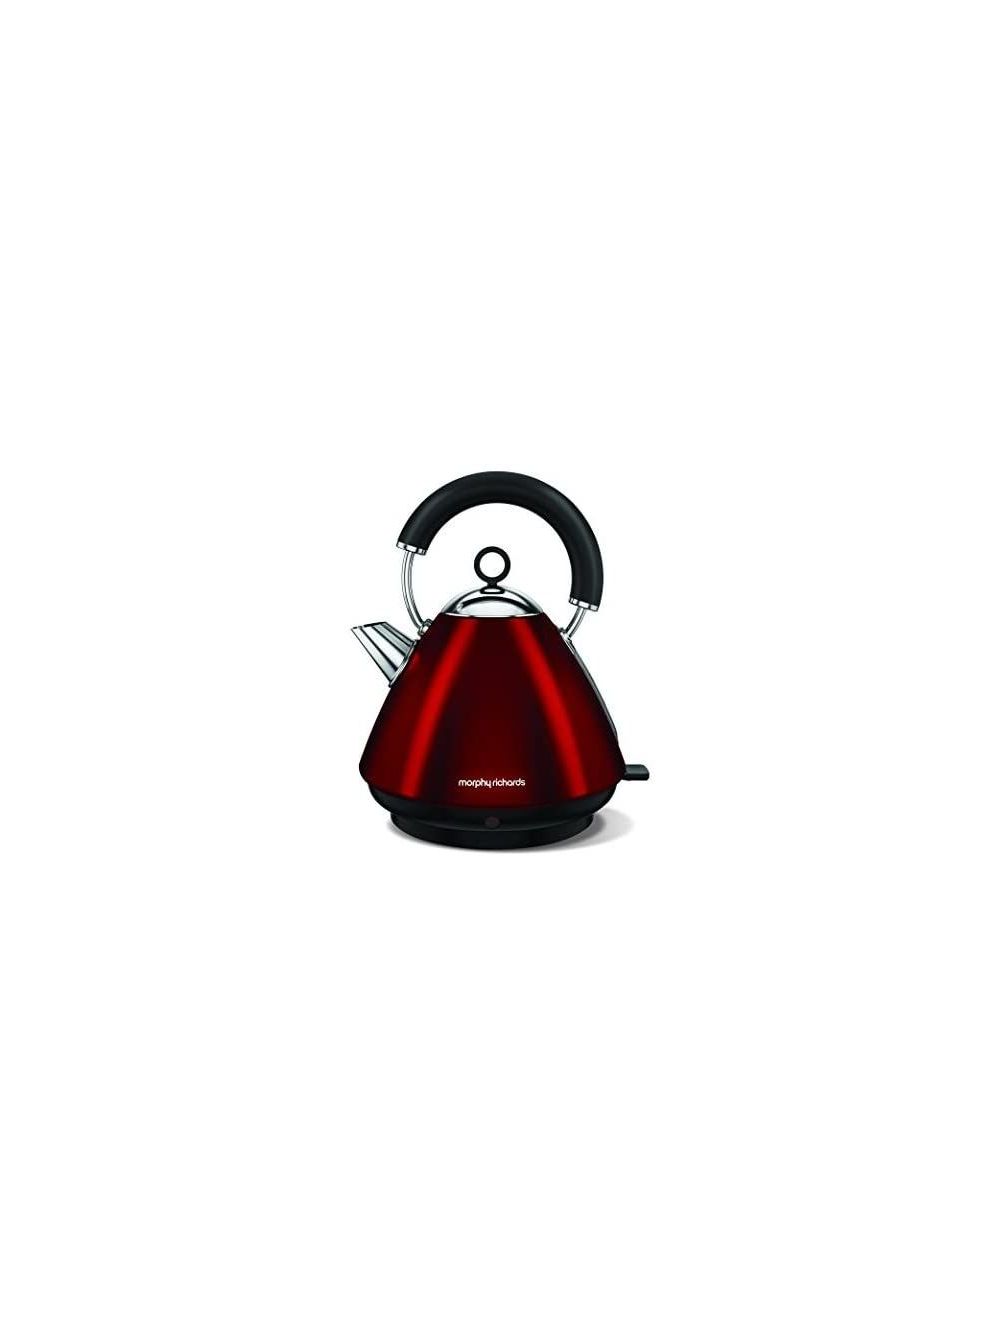 Morphy Richards Accents Pyramid Kettle - Red-102029